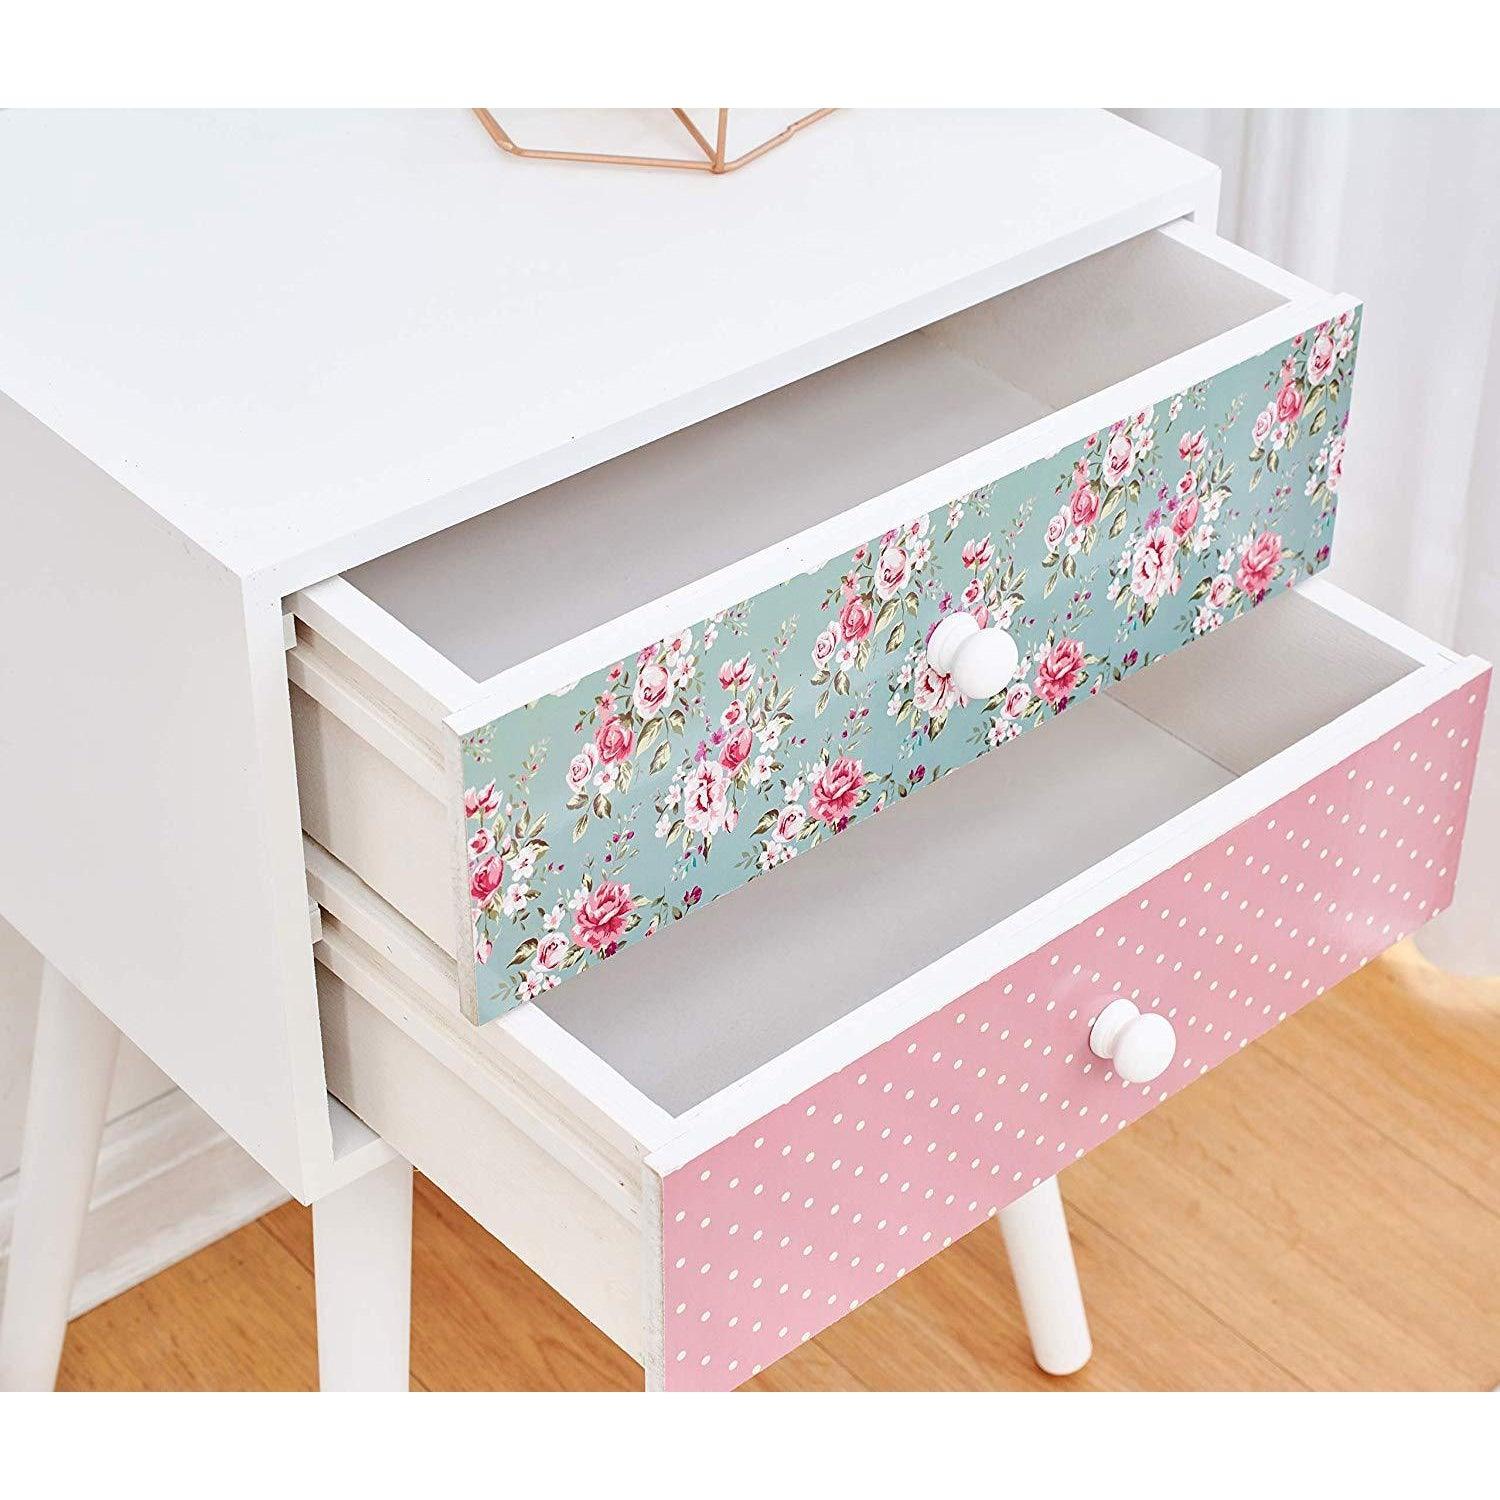 Cherry Tree Furniture CANTERBURY Wooden 2-Drawer Bedside Table Nightstand, Rose & Polka Dot Pattern